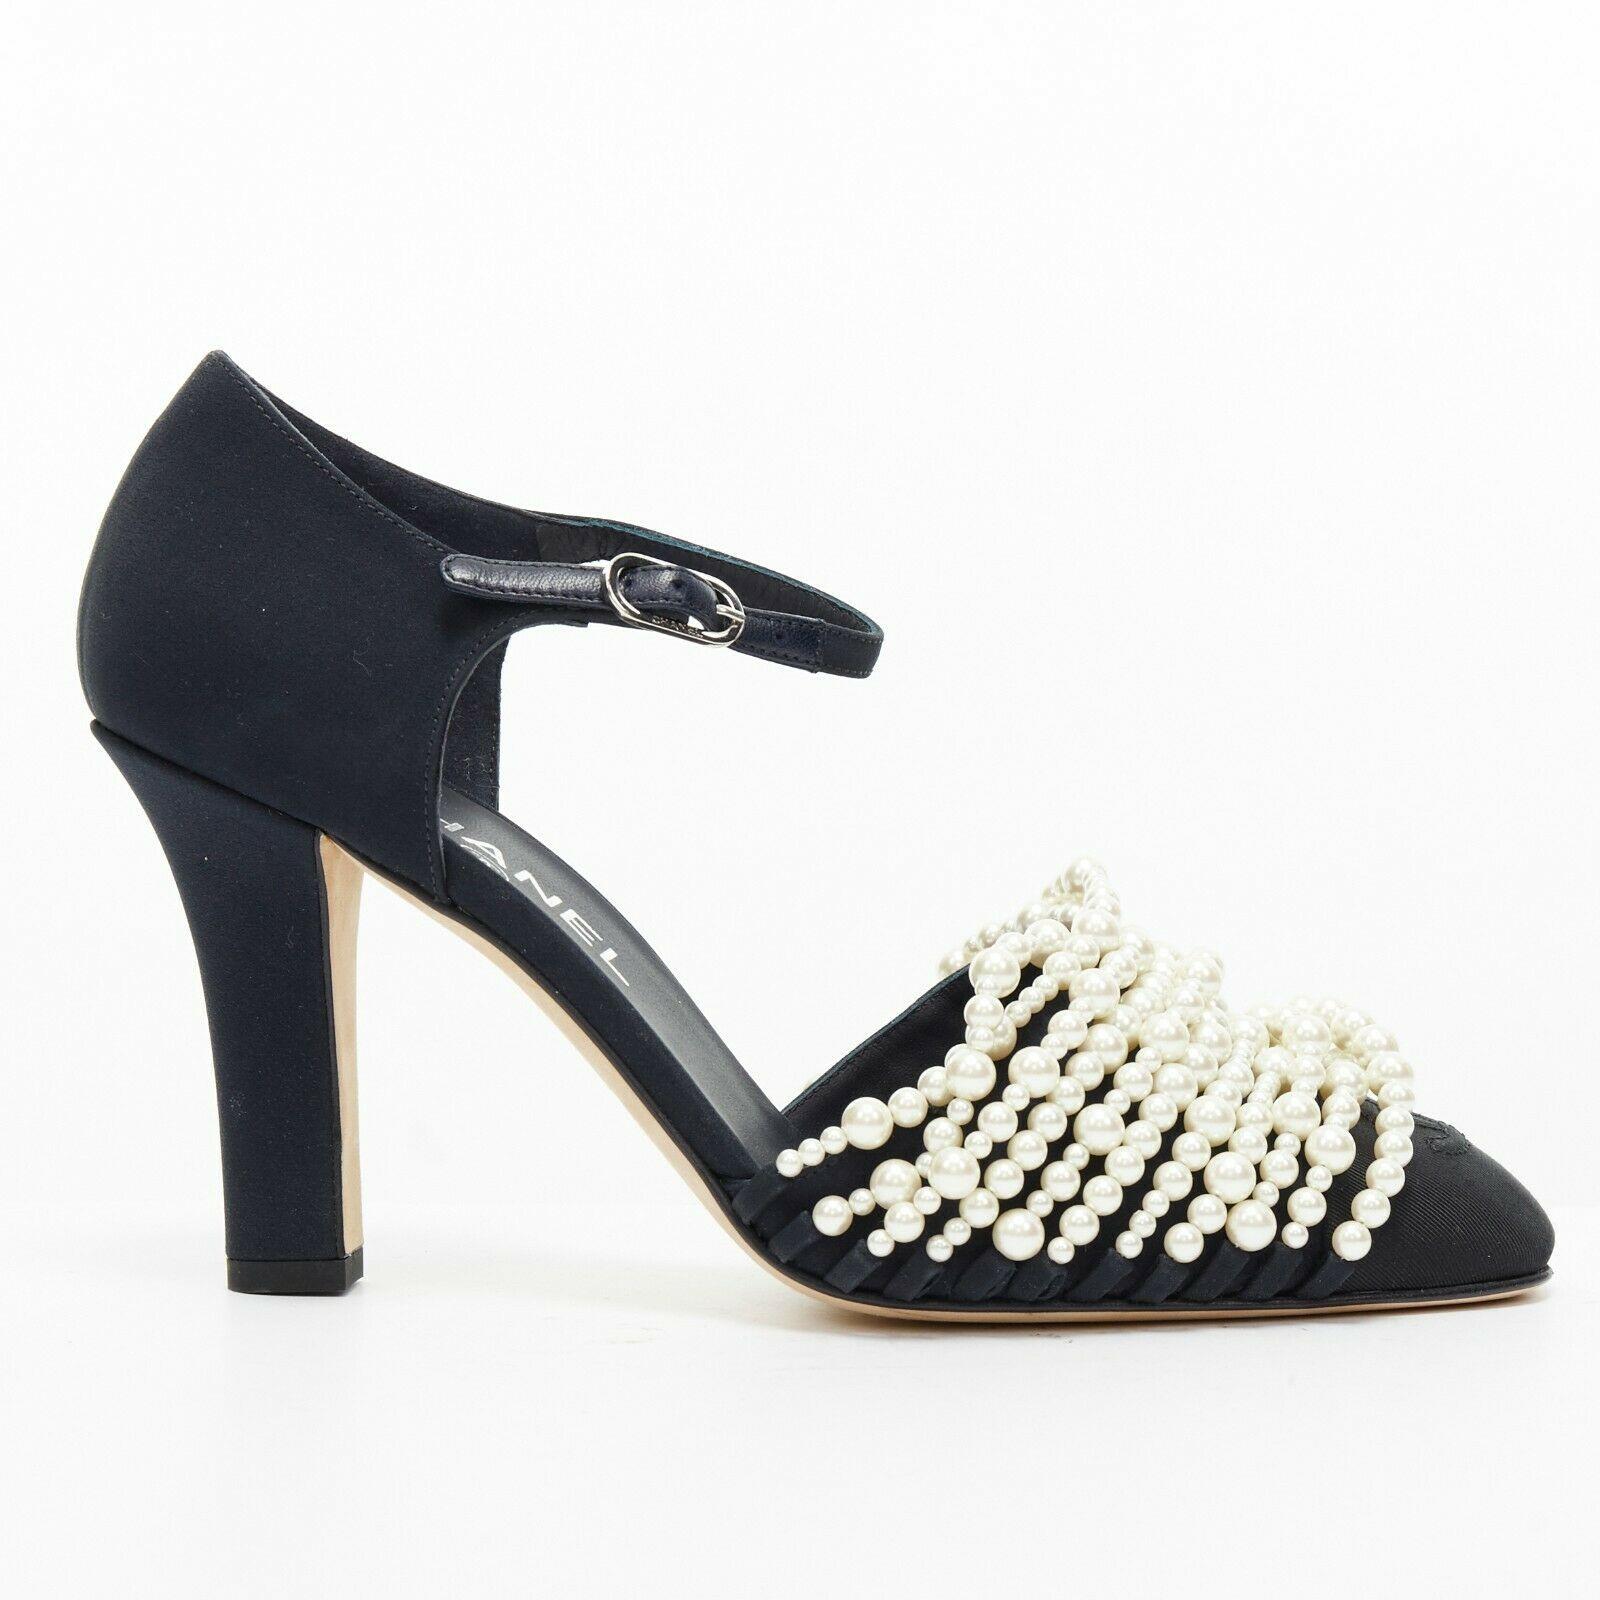 new CHANEL 17A navy multi pearl embellished CC satin toe ankle strap heels EU39

CHANEL
FROM THE FALL WINTER 2017 COLLECTION
Navy blue. Satin covered heel. Chunky heel. Ankle strap closure. 
Silver-tone Chanel signed buckle. White faux pearl strand